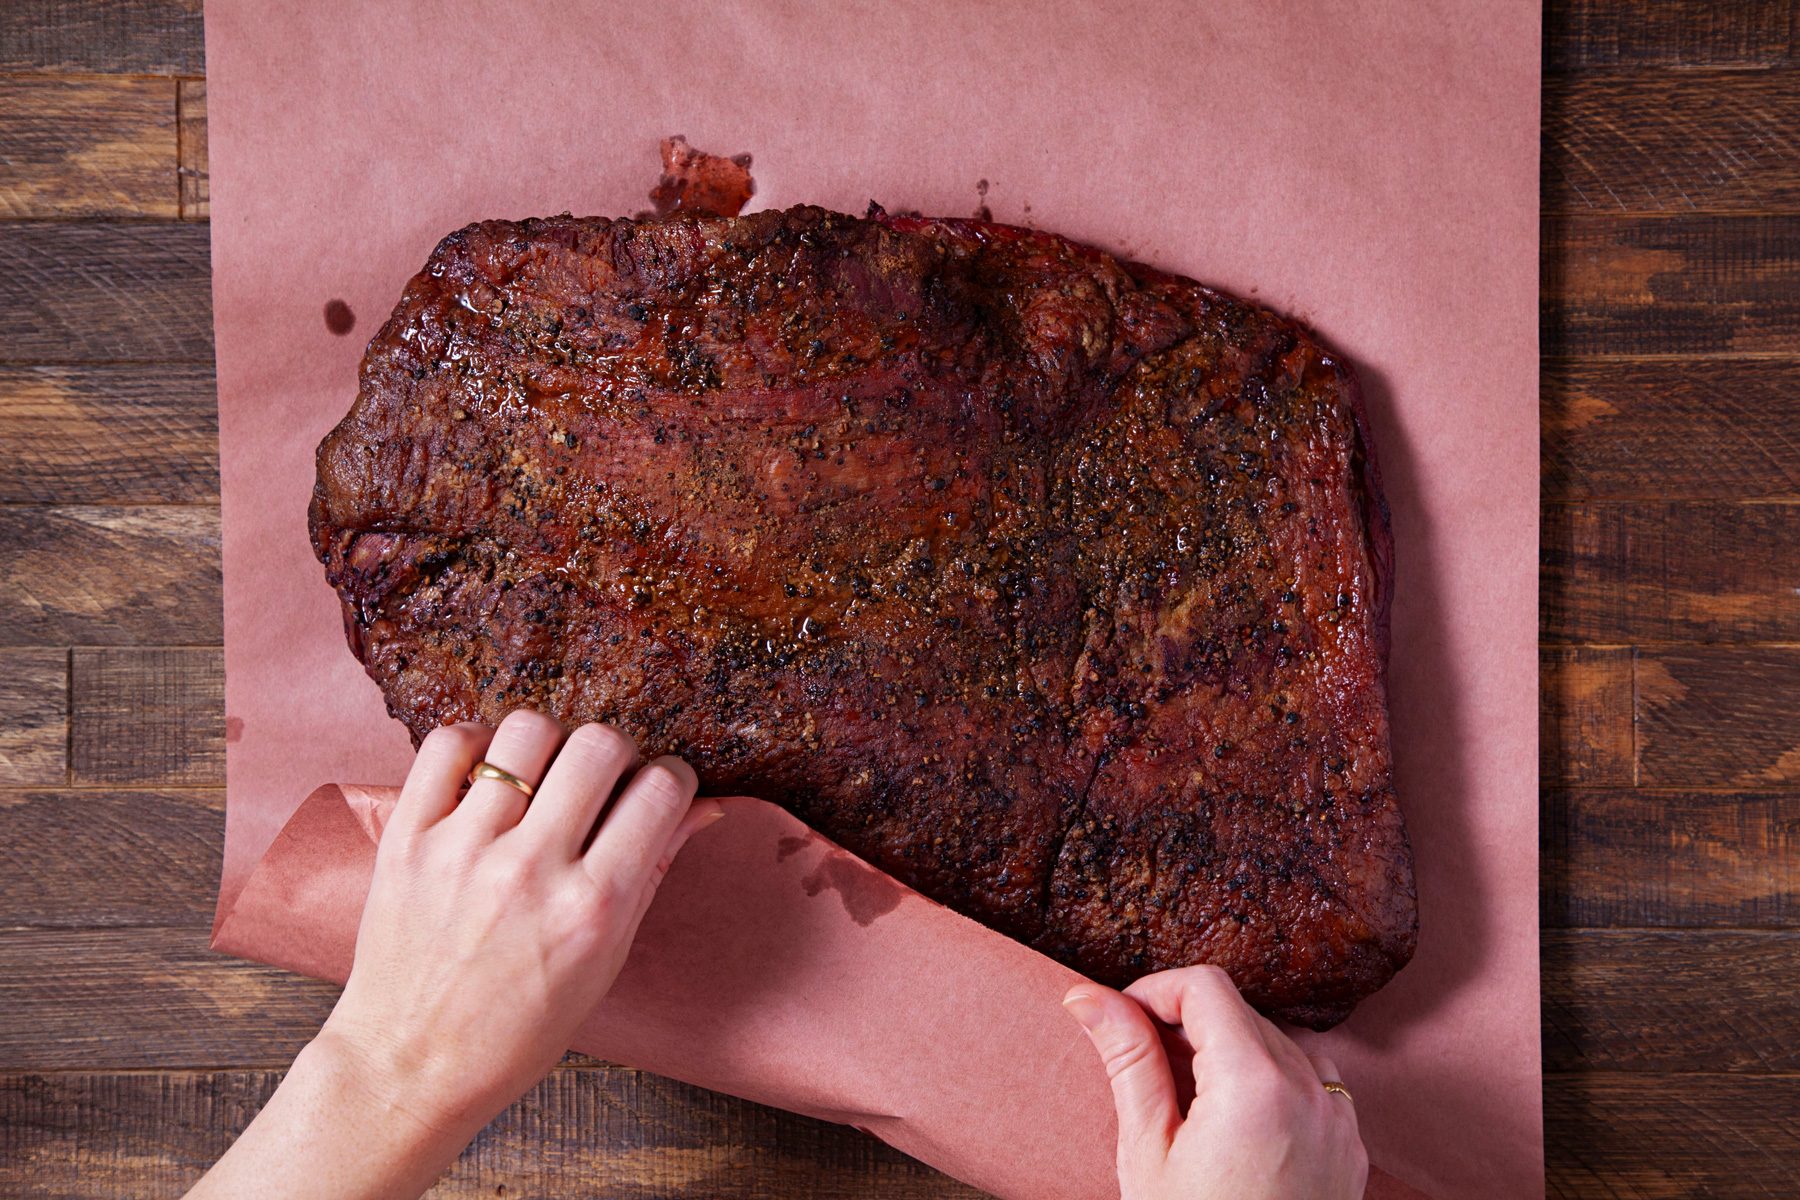 A person wrapping the brisket in unwaxed butcher paper